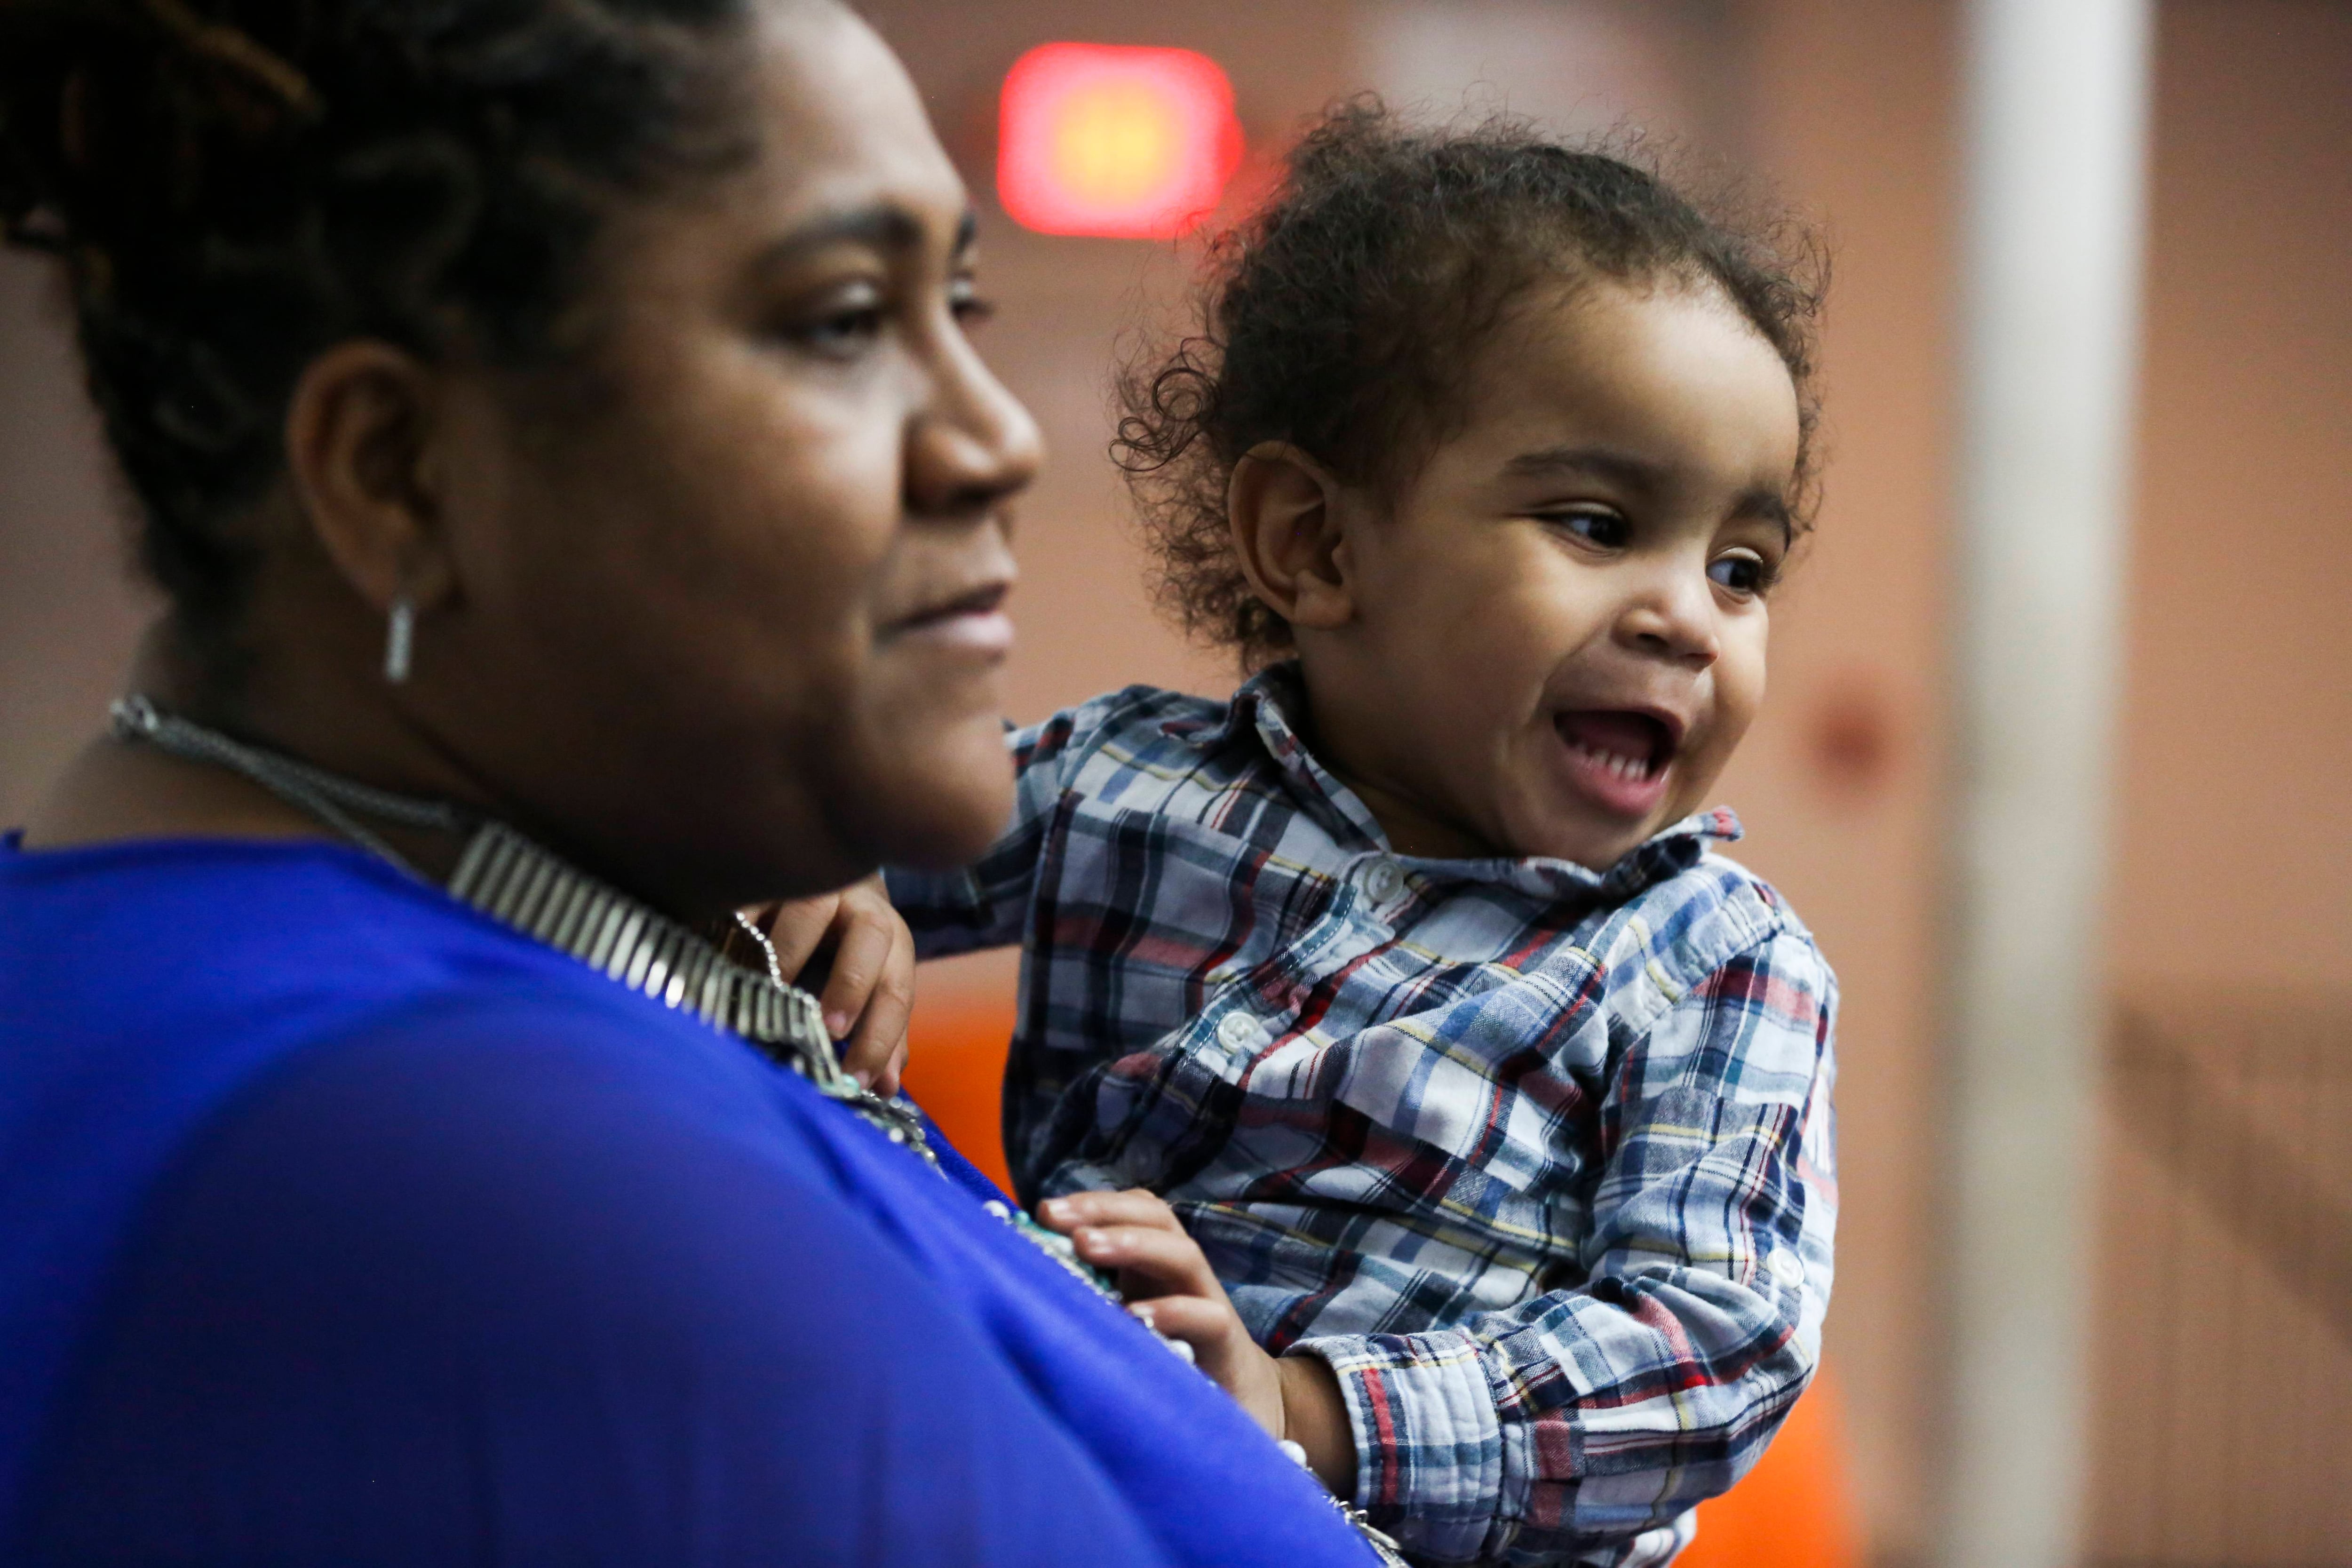 Ana Rodney, pictured with son Asher, is the founder and director of MOMCares. MOMCares. MOMCares is a postpartem doula service specifically for Black and low-income parents in Baltimore